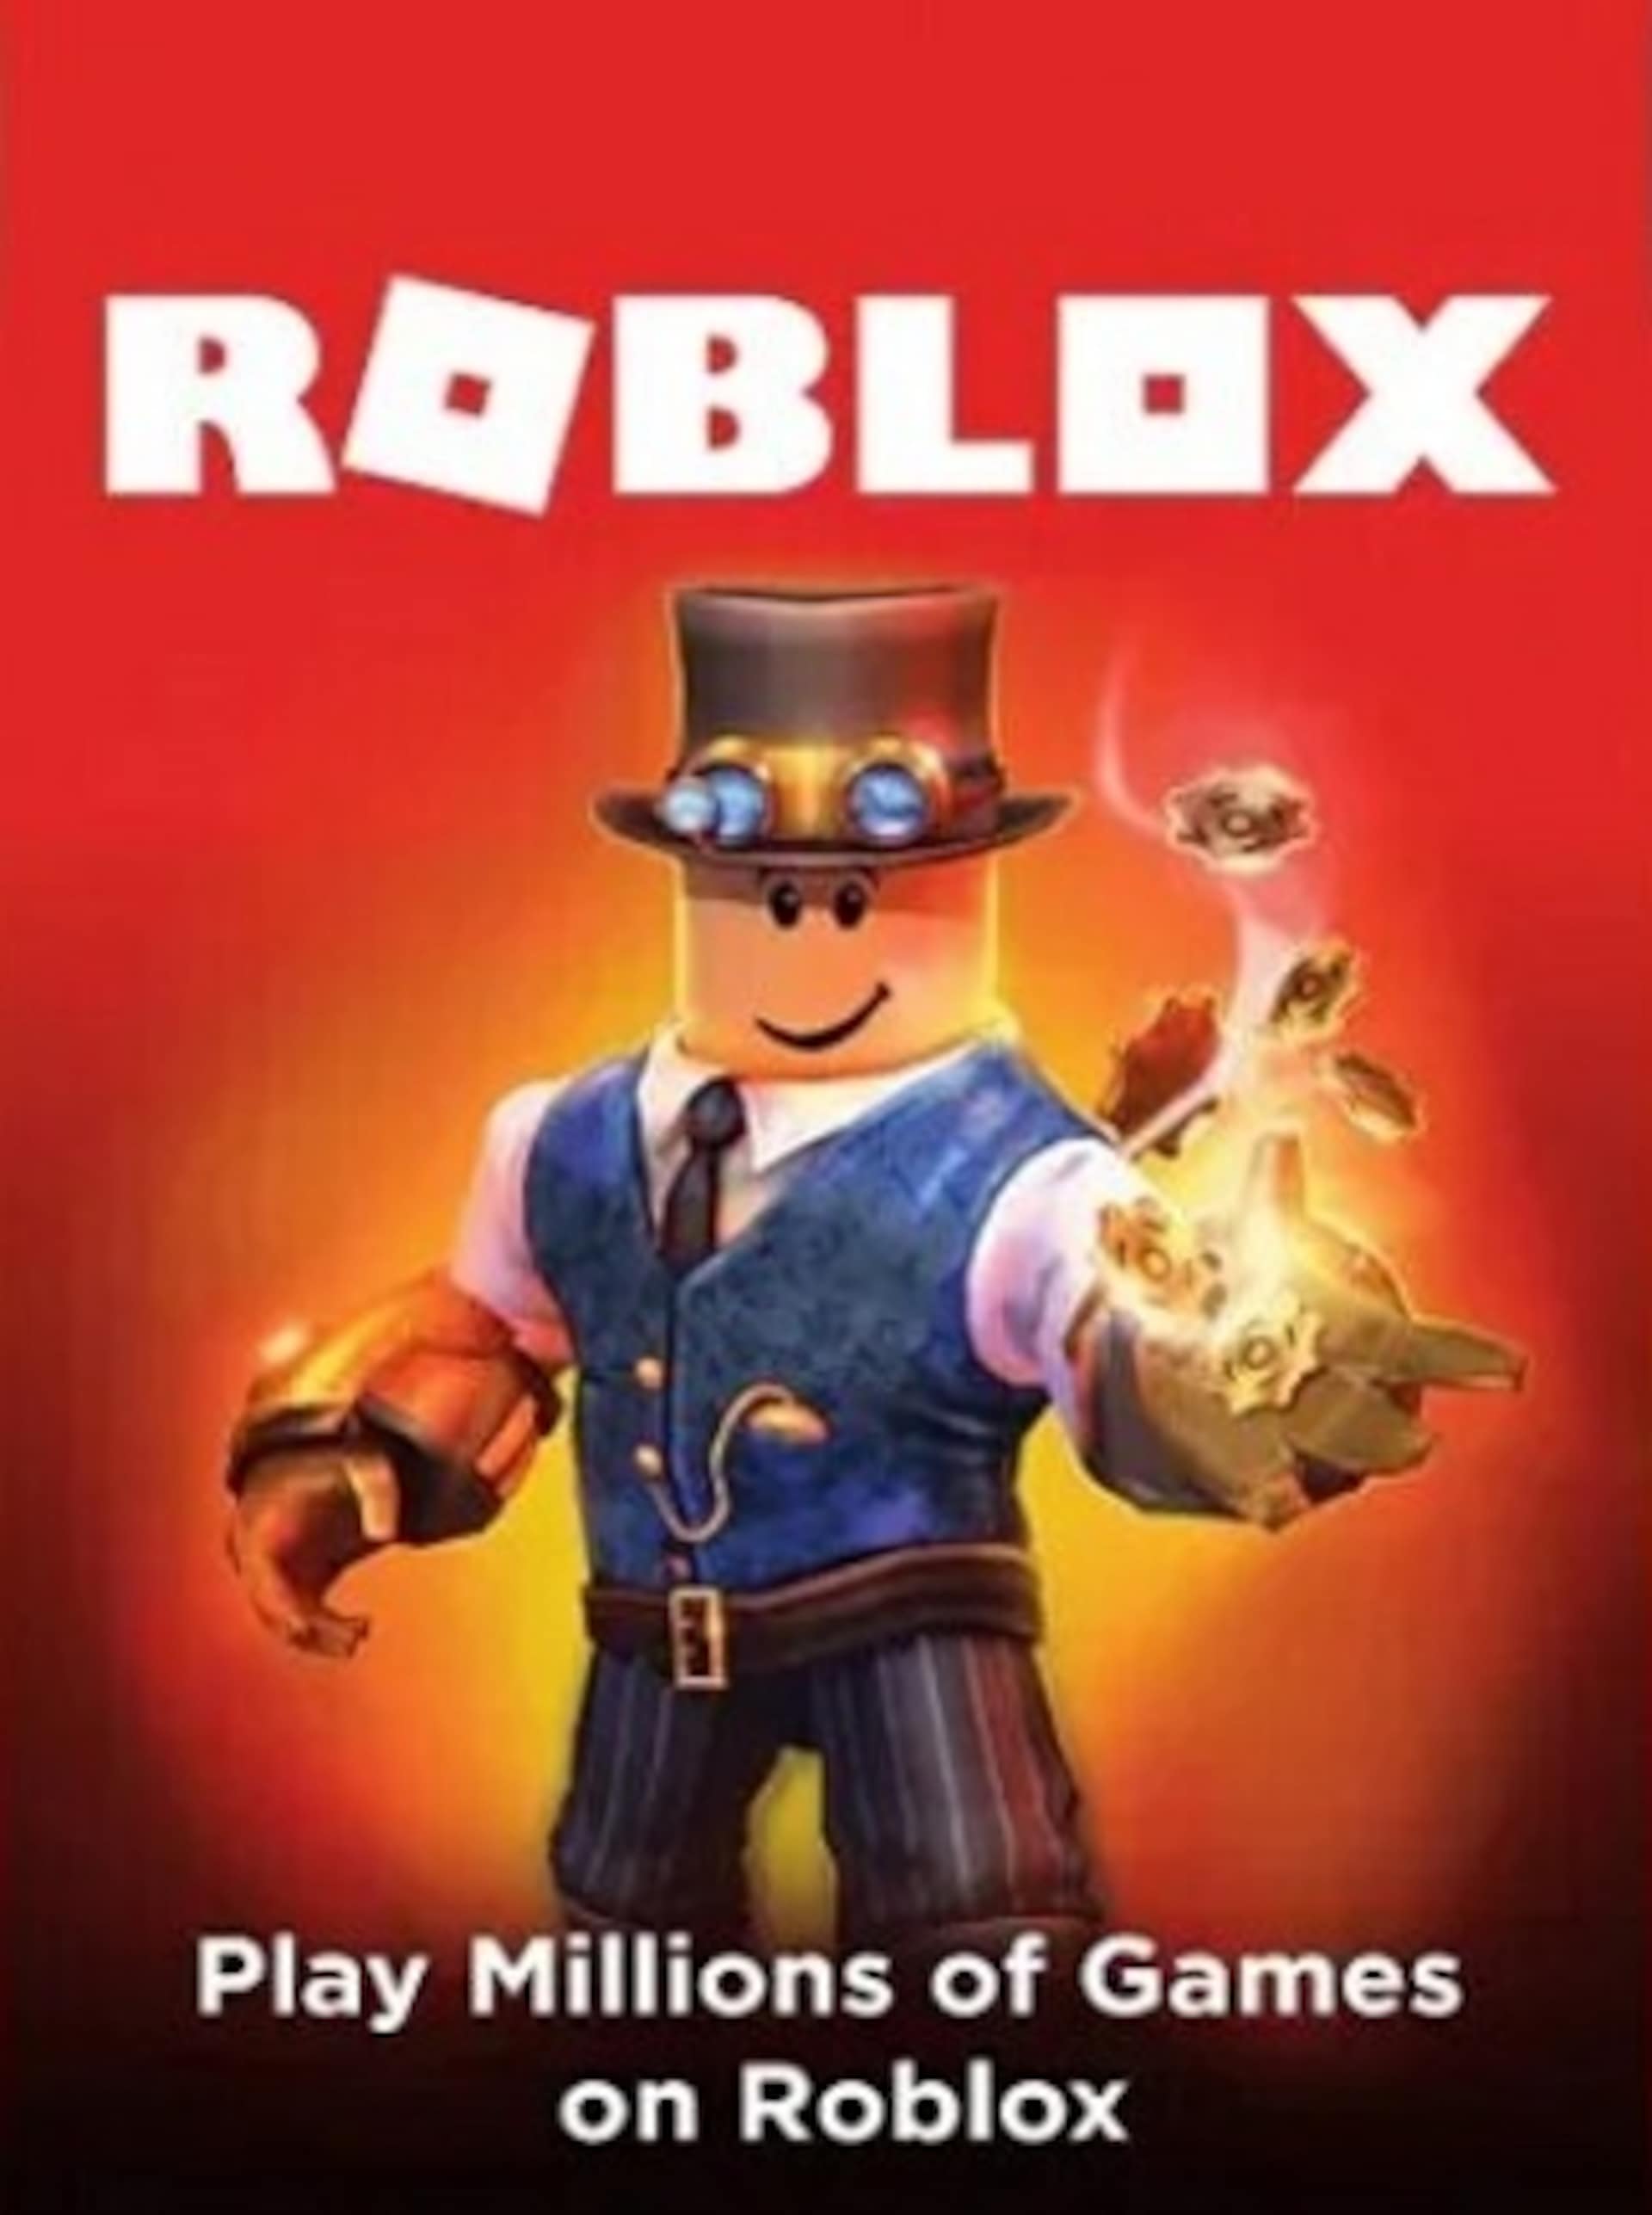 Roblox 10 EUR (Gift cards) for free!